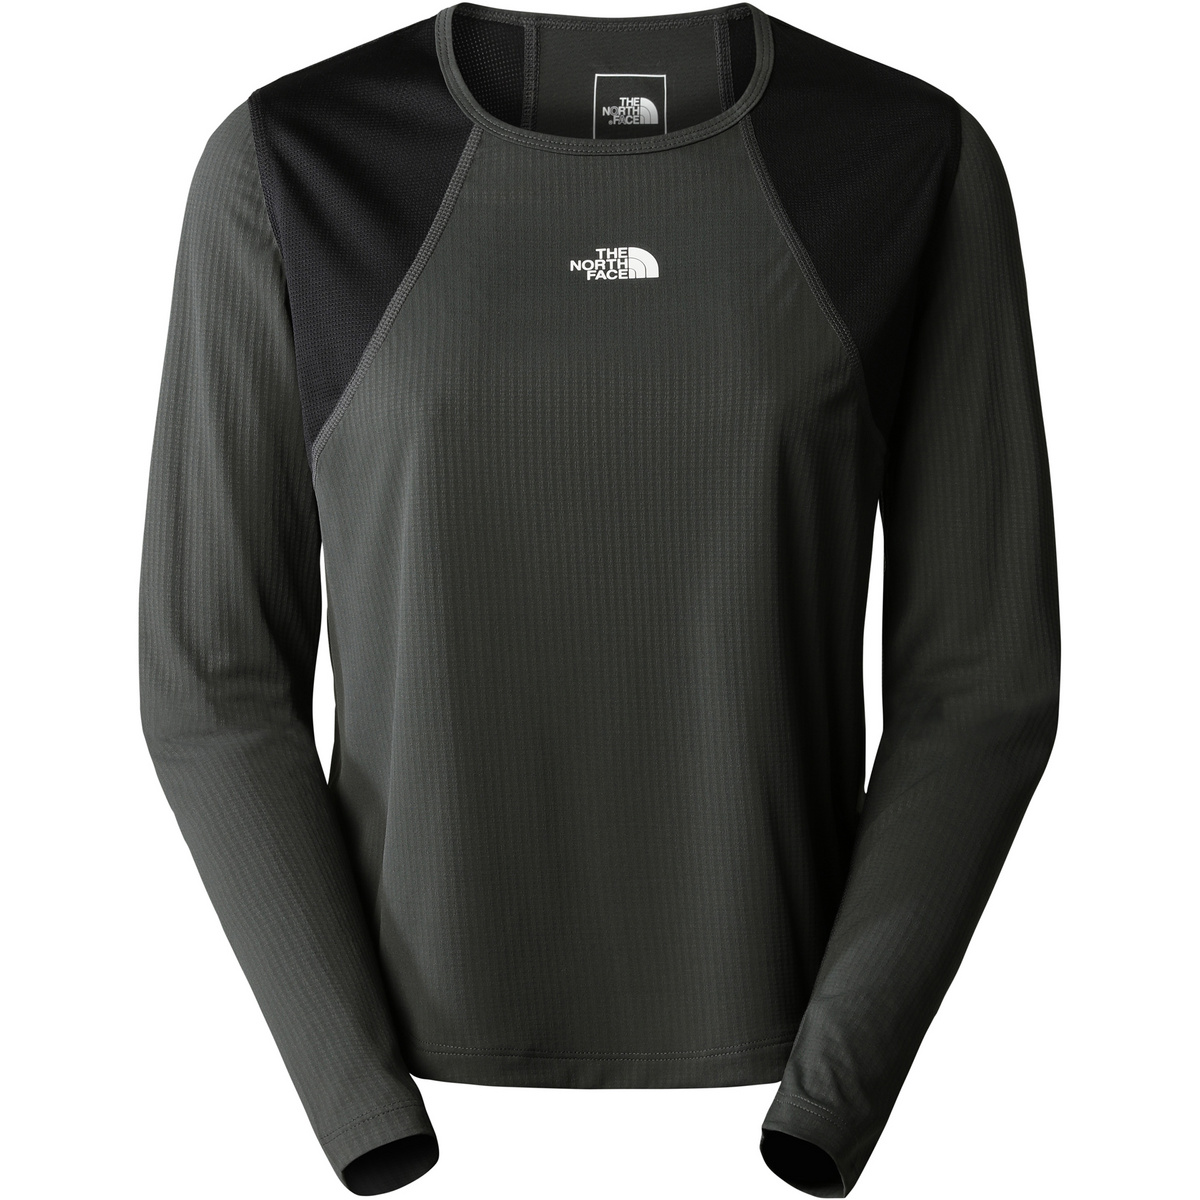 The North Face Damen Lightbright Longsleeve von The North Face